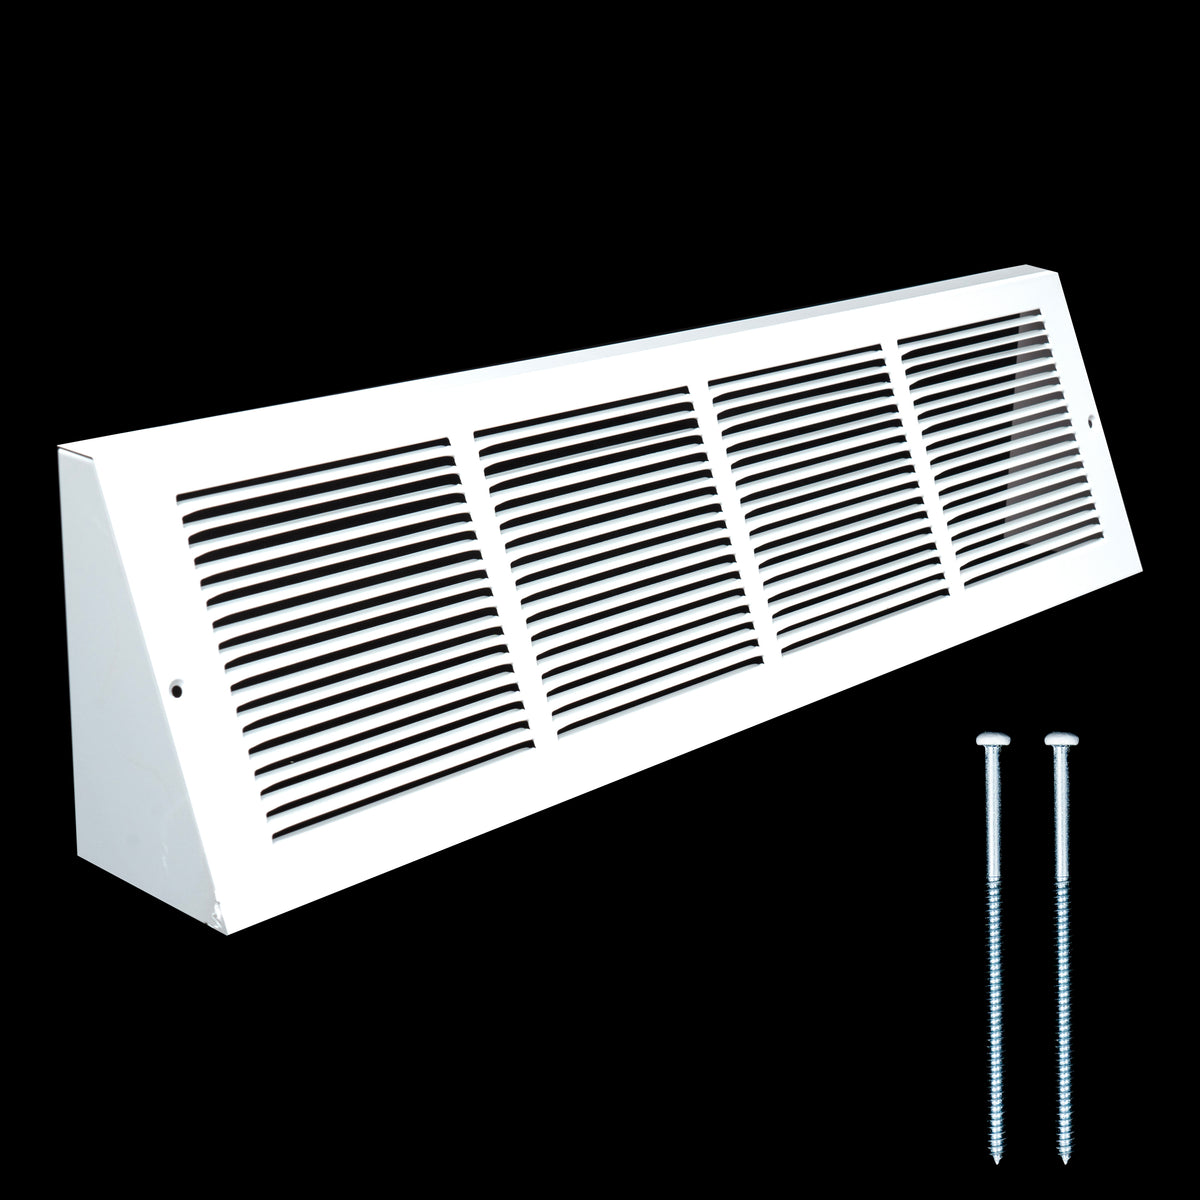 24"W x 6"H [Duct Opening] Steel Triangular Baseboard Return Air Grille | Air Register Vent Cover Grill | 3.75" Depth | White | Outer Dimensions: 25-3/4" x 6-5/8"